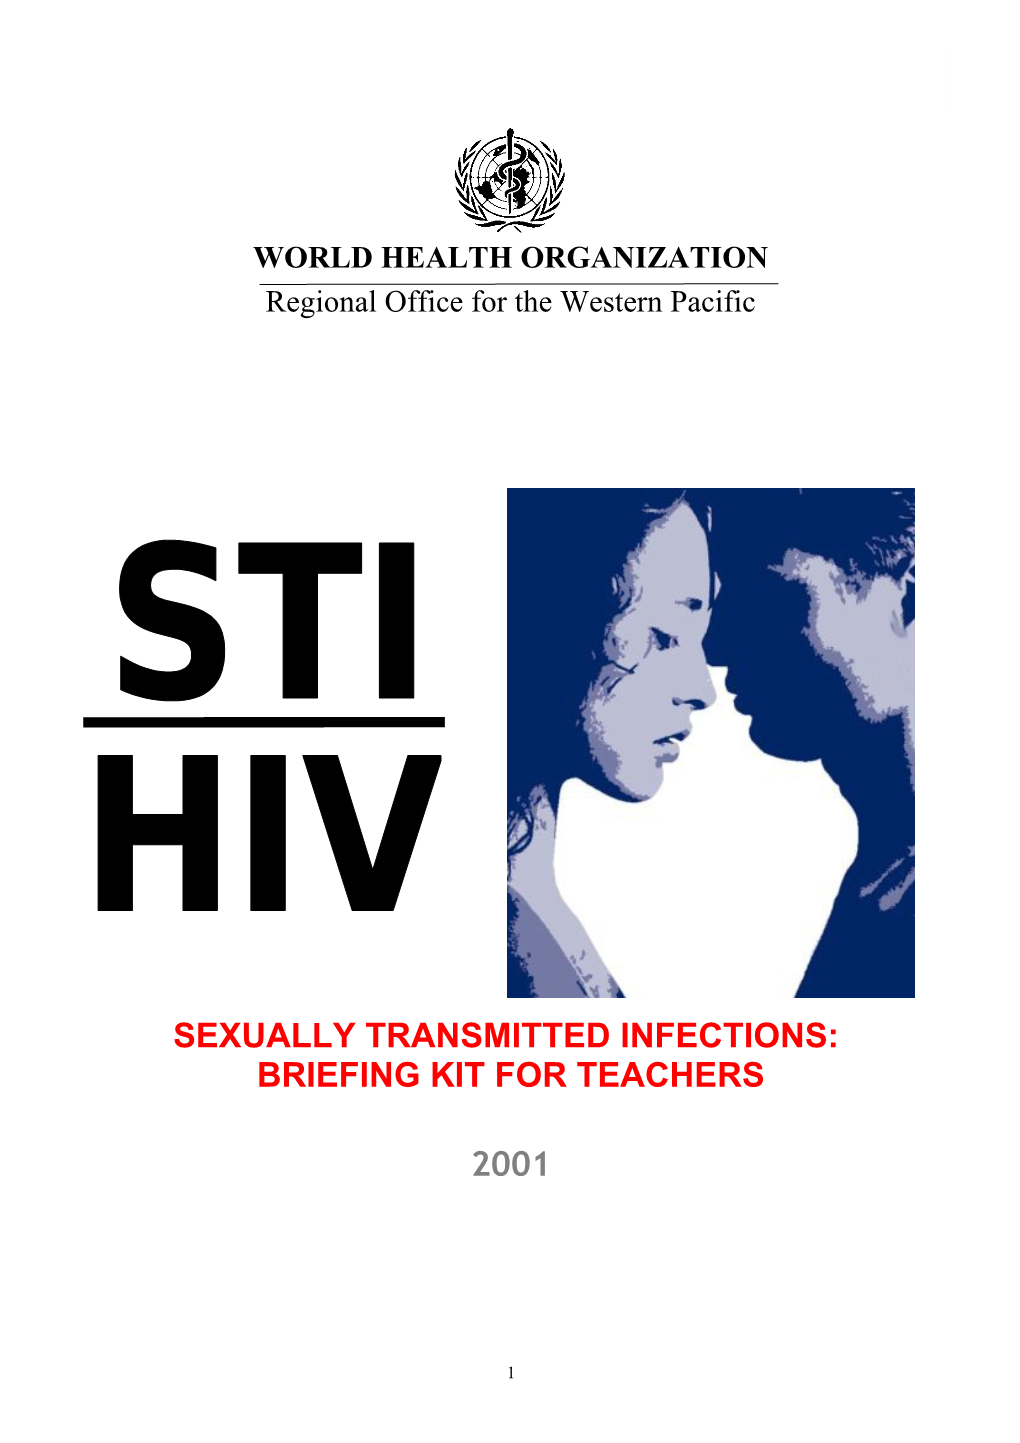 Sexually Transmitted Infections: Briefing Kit for Teachers WHO/WPRO